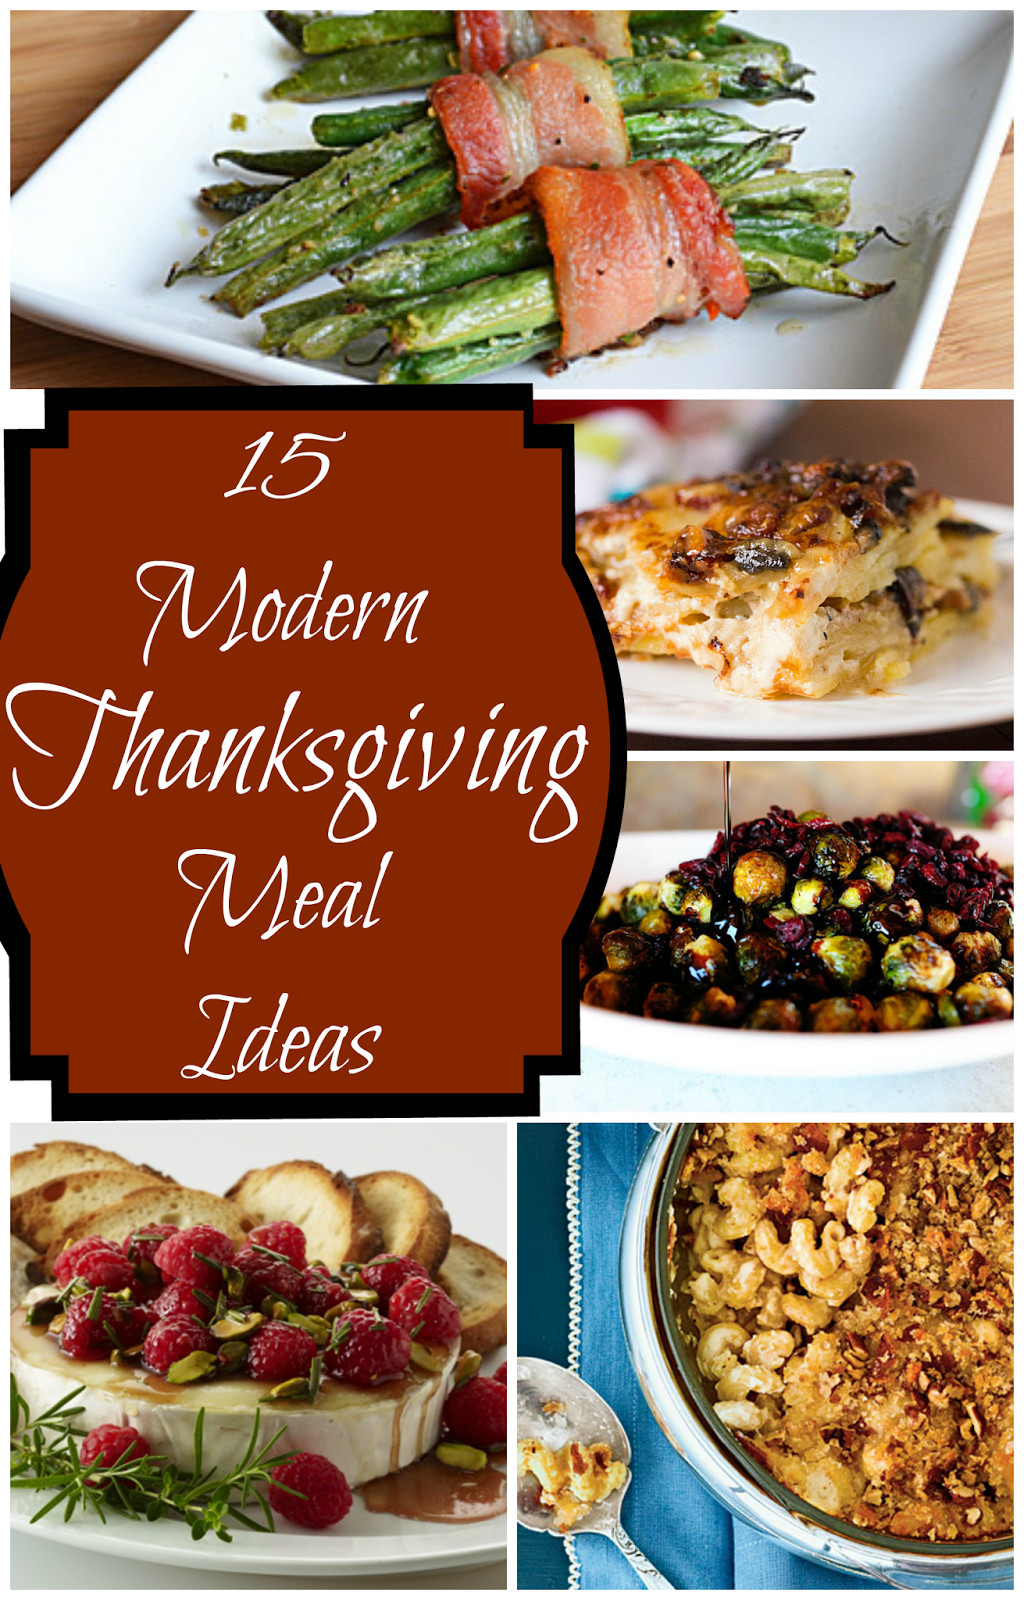 Recipes For Thanksgiving Dinner
 Not Your Mother s Recipes 15 Modern Thanksgiving Meal